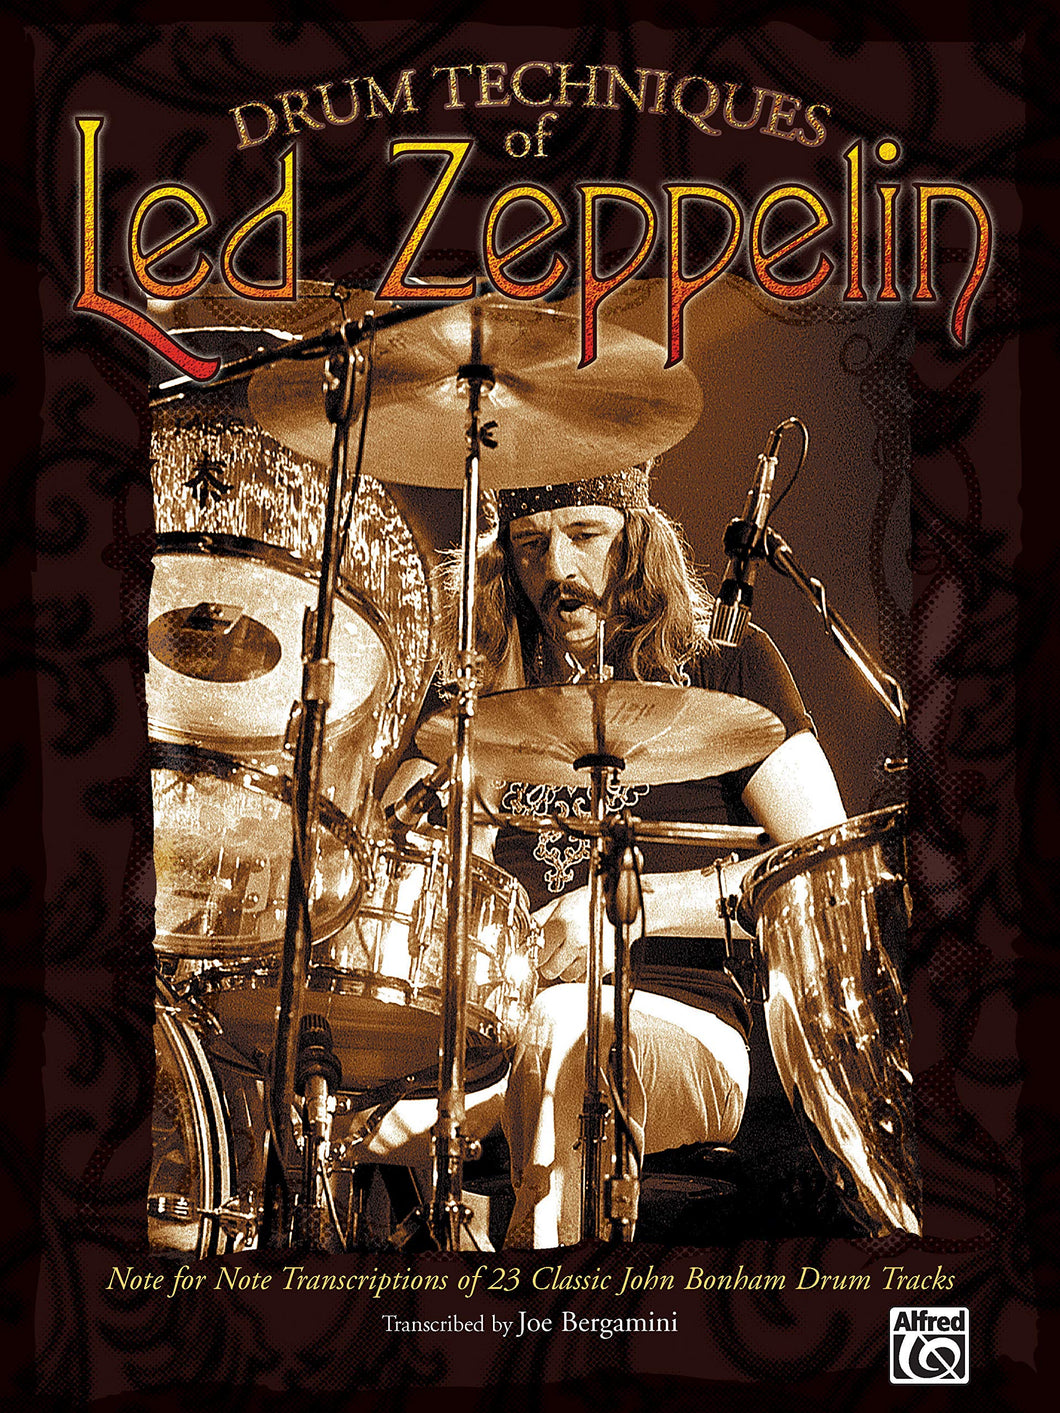 Stairway to Heaven - Led Zeppelin - Collection of Drum Transcriptions / Drum Sheet Music - Alfred Music DTLZNFNT